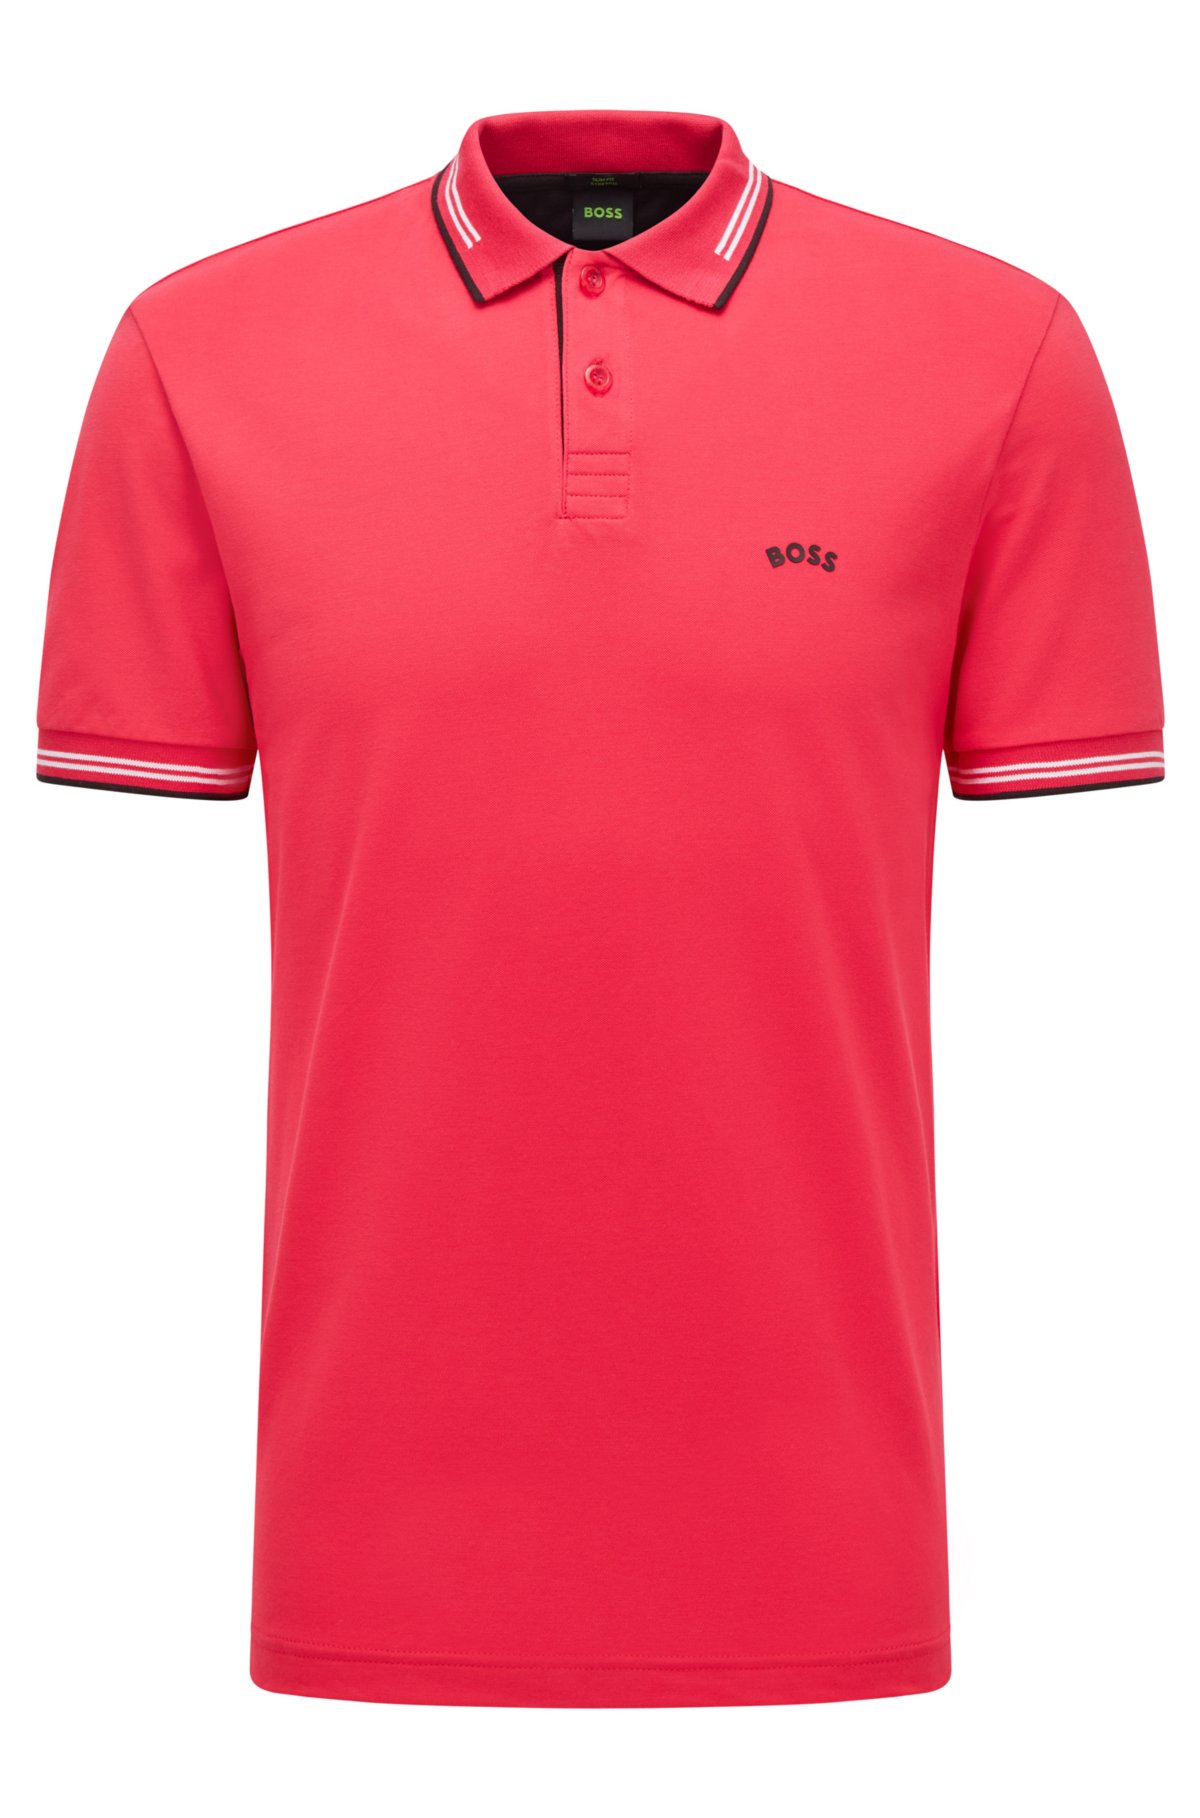 Anders tarief Kostuums BOSS - Curved-logo slim-fit polo shirt in stretch-cotton piqué